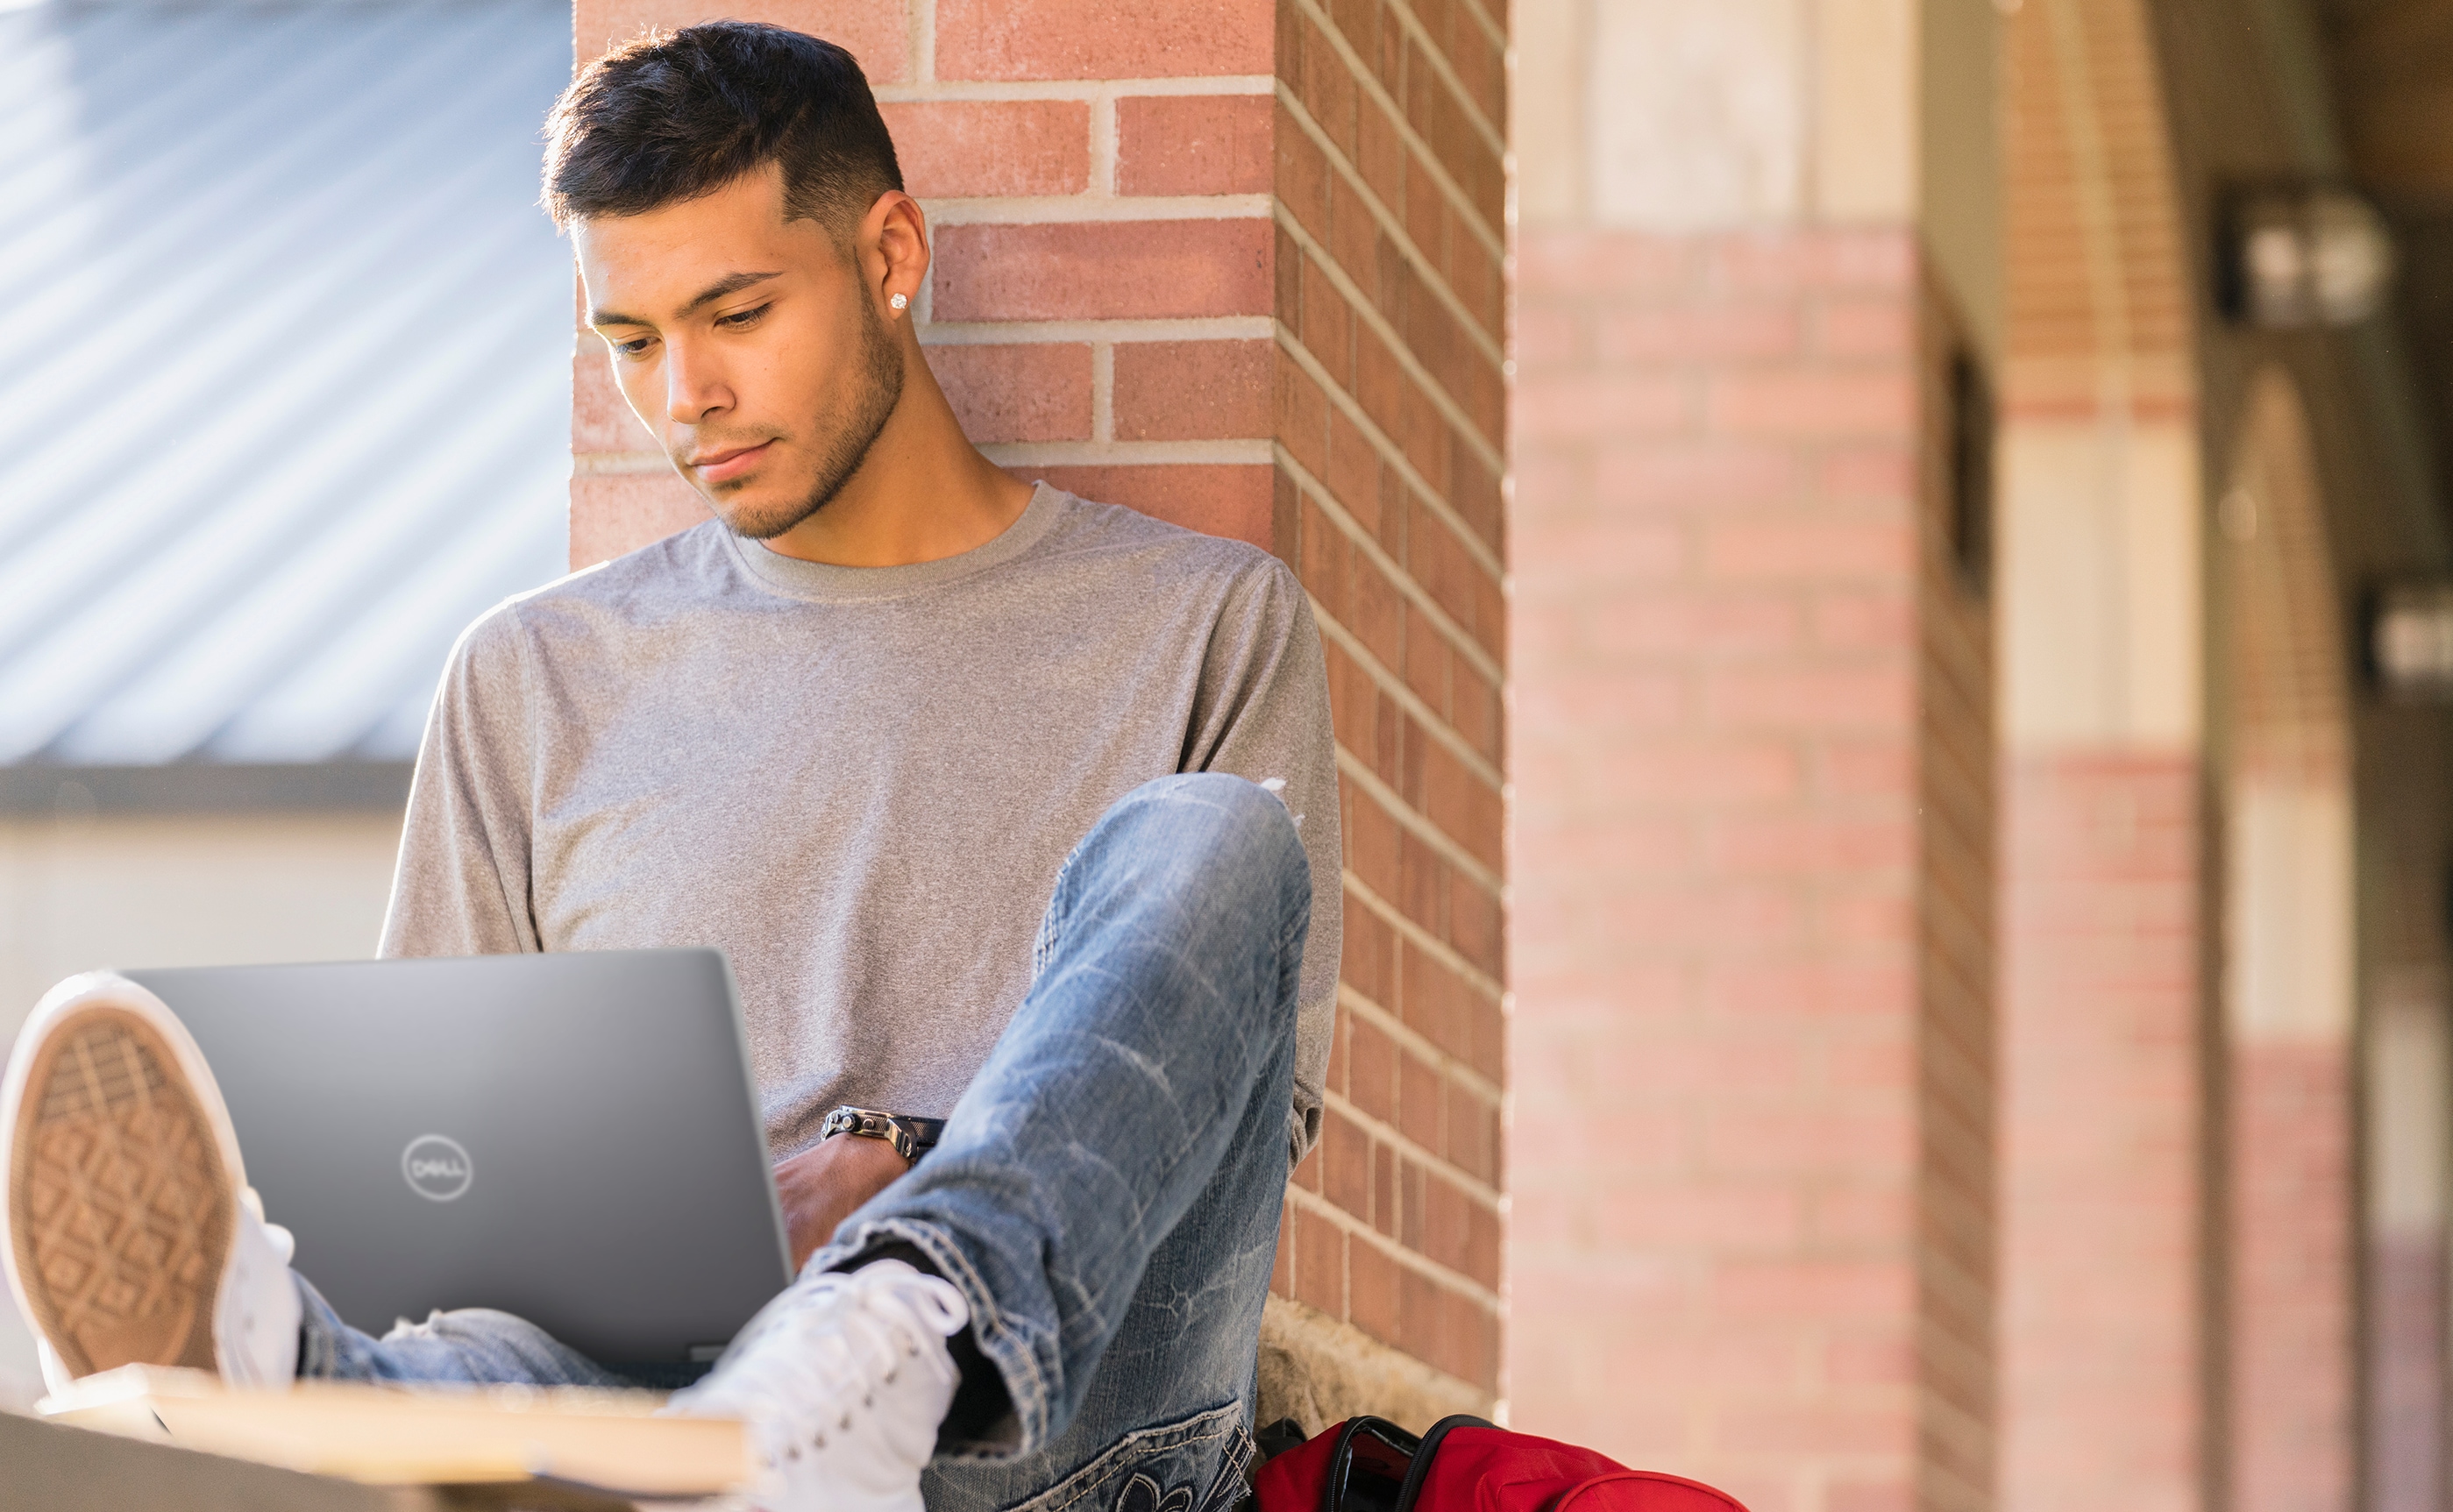 The best university laptops from Dell